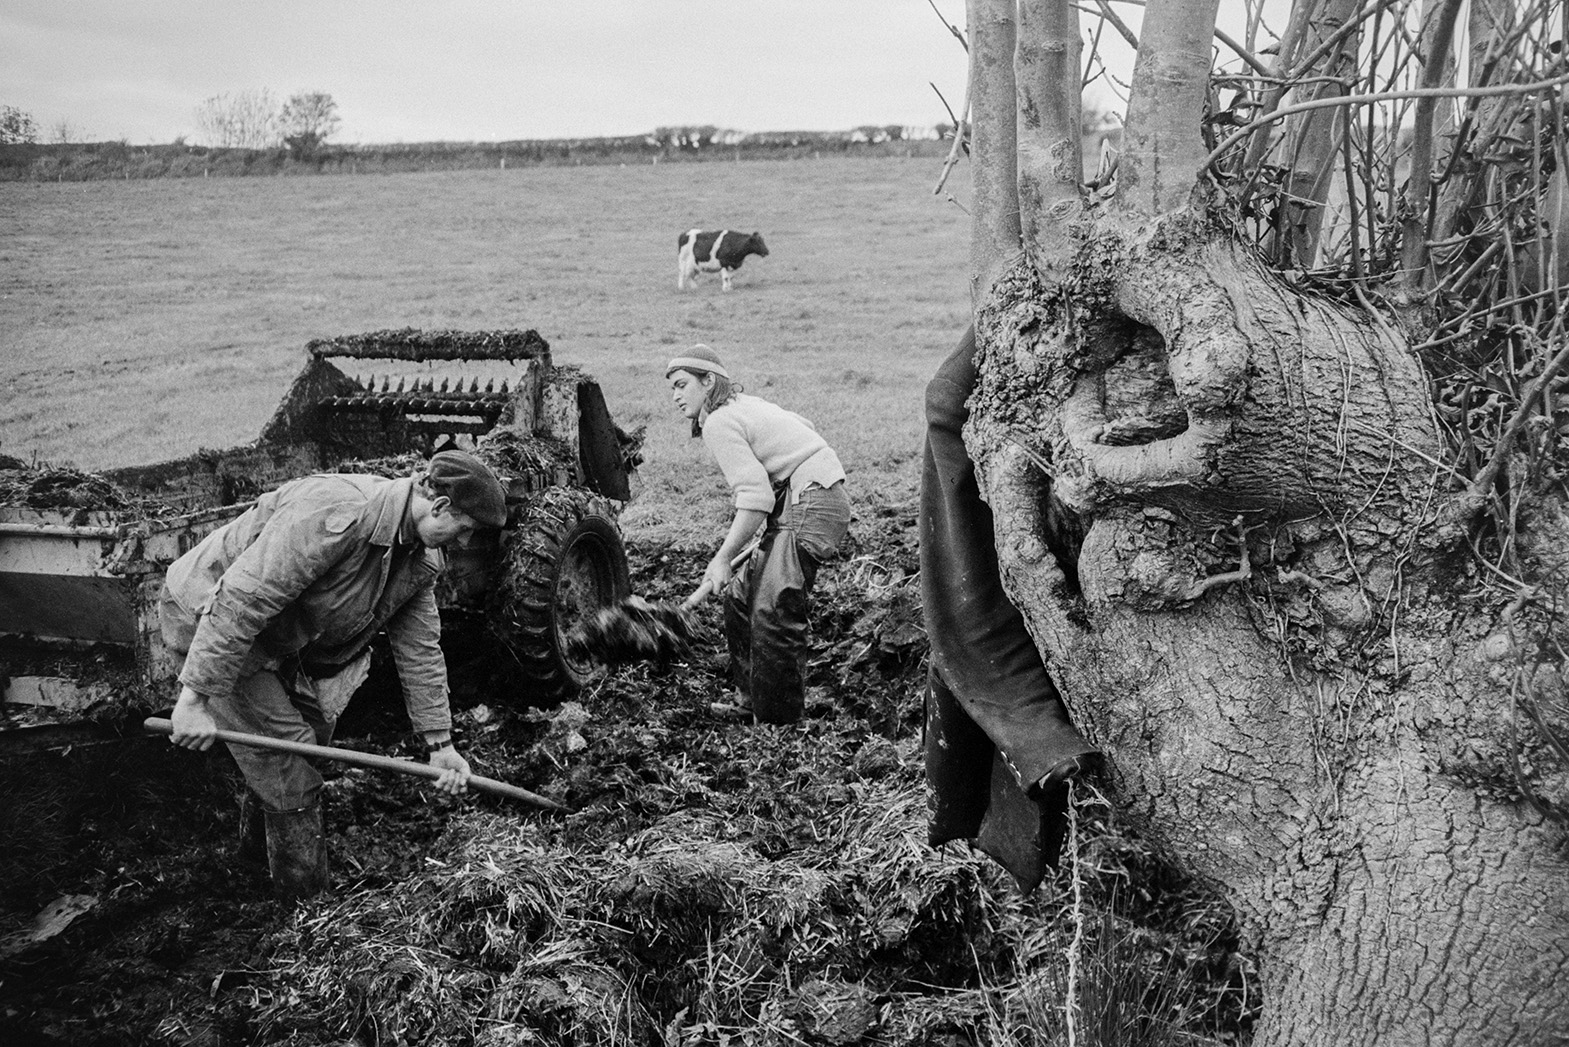 Derek Bright and Ivor Bourne, in the foreground, loading a muck spreader with manure from a muck heap or dung heap in a field at Mill Road Farm, Beaford. A jacket is hung on a tree in the foreground and a cow is visible in the background. The farm was also known as Jeffrys.